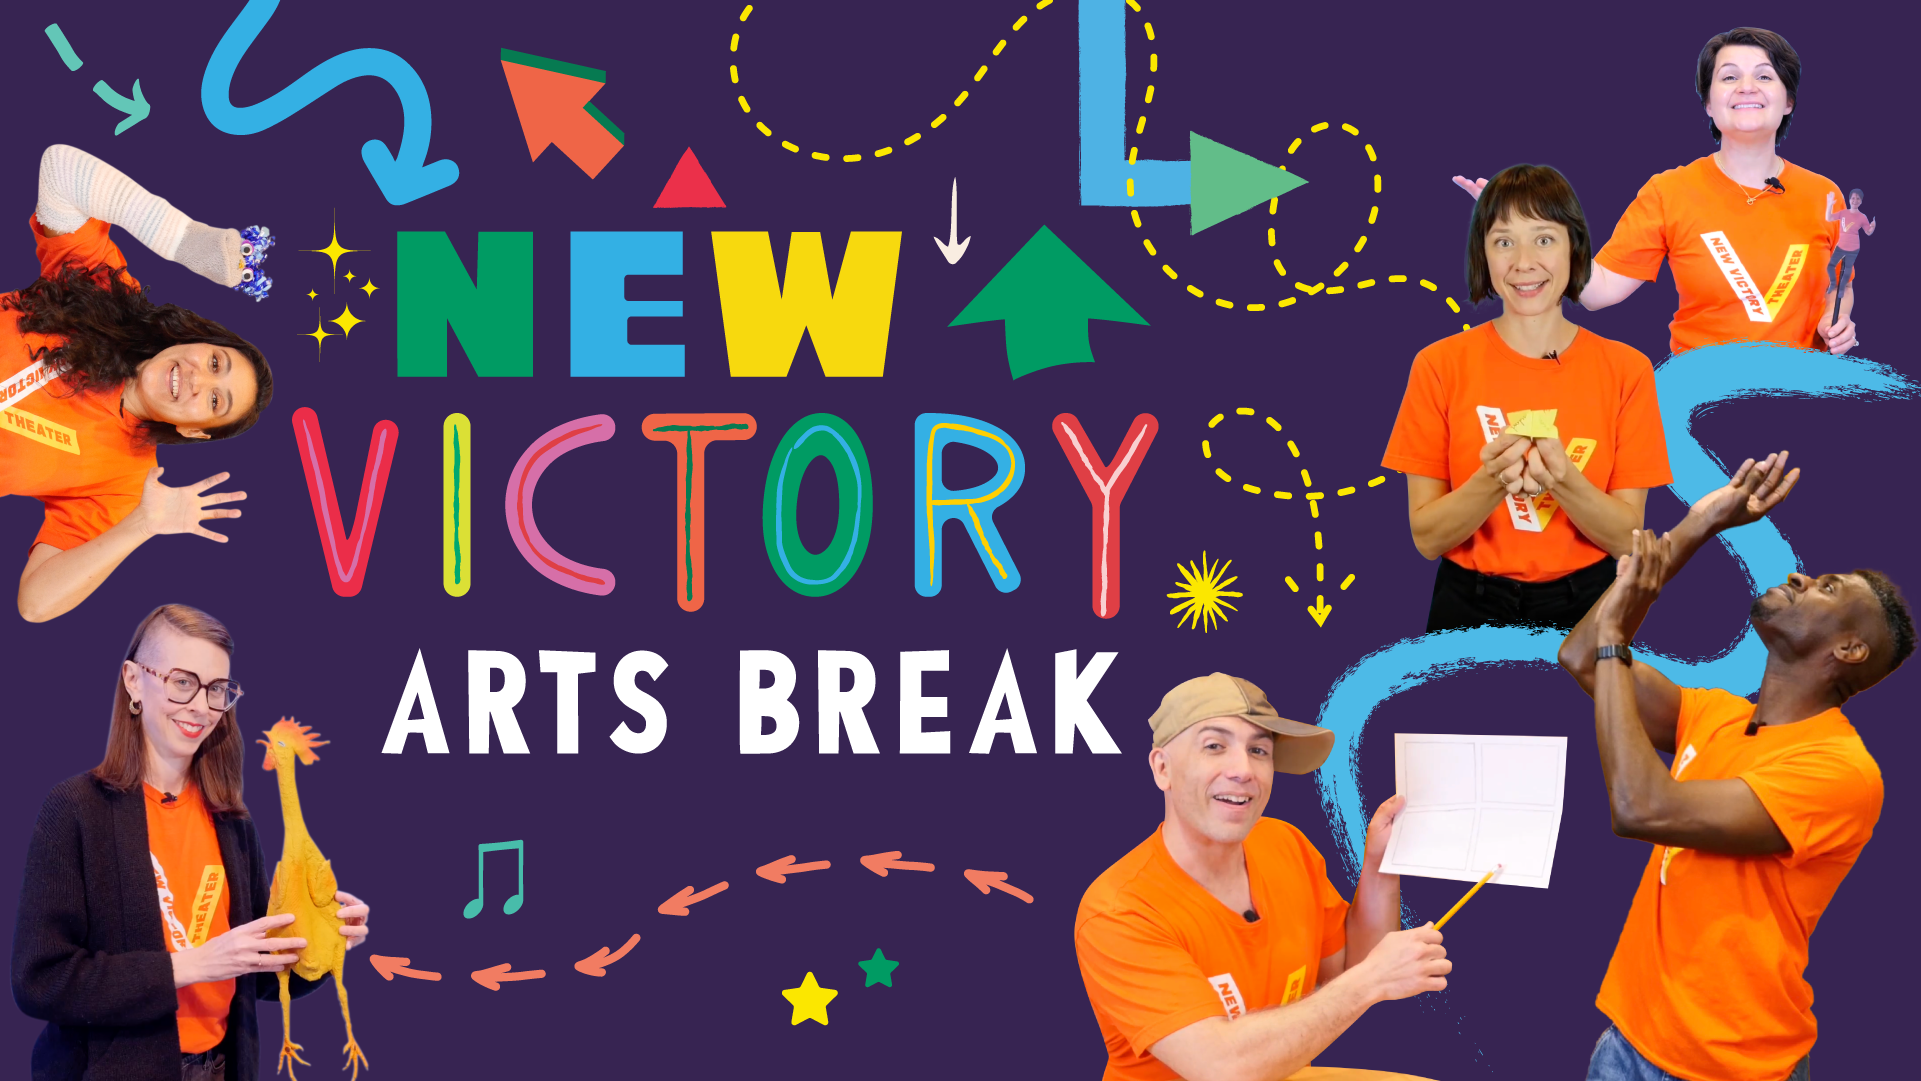 New Victory Arts Break in playful multi-colored text, surrounded by colorful arrows and cutout photos of New Victory Teaching Artists posing in orange t-shirts